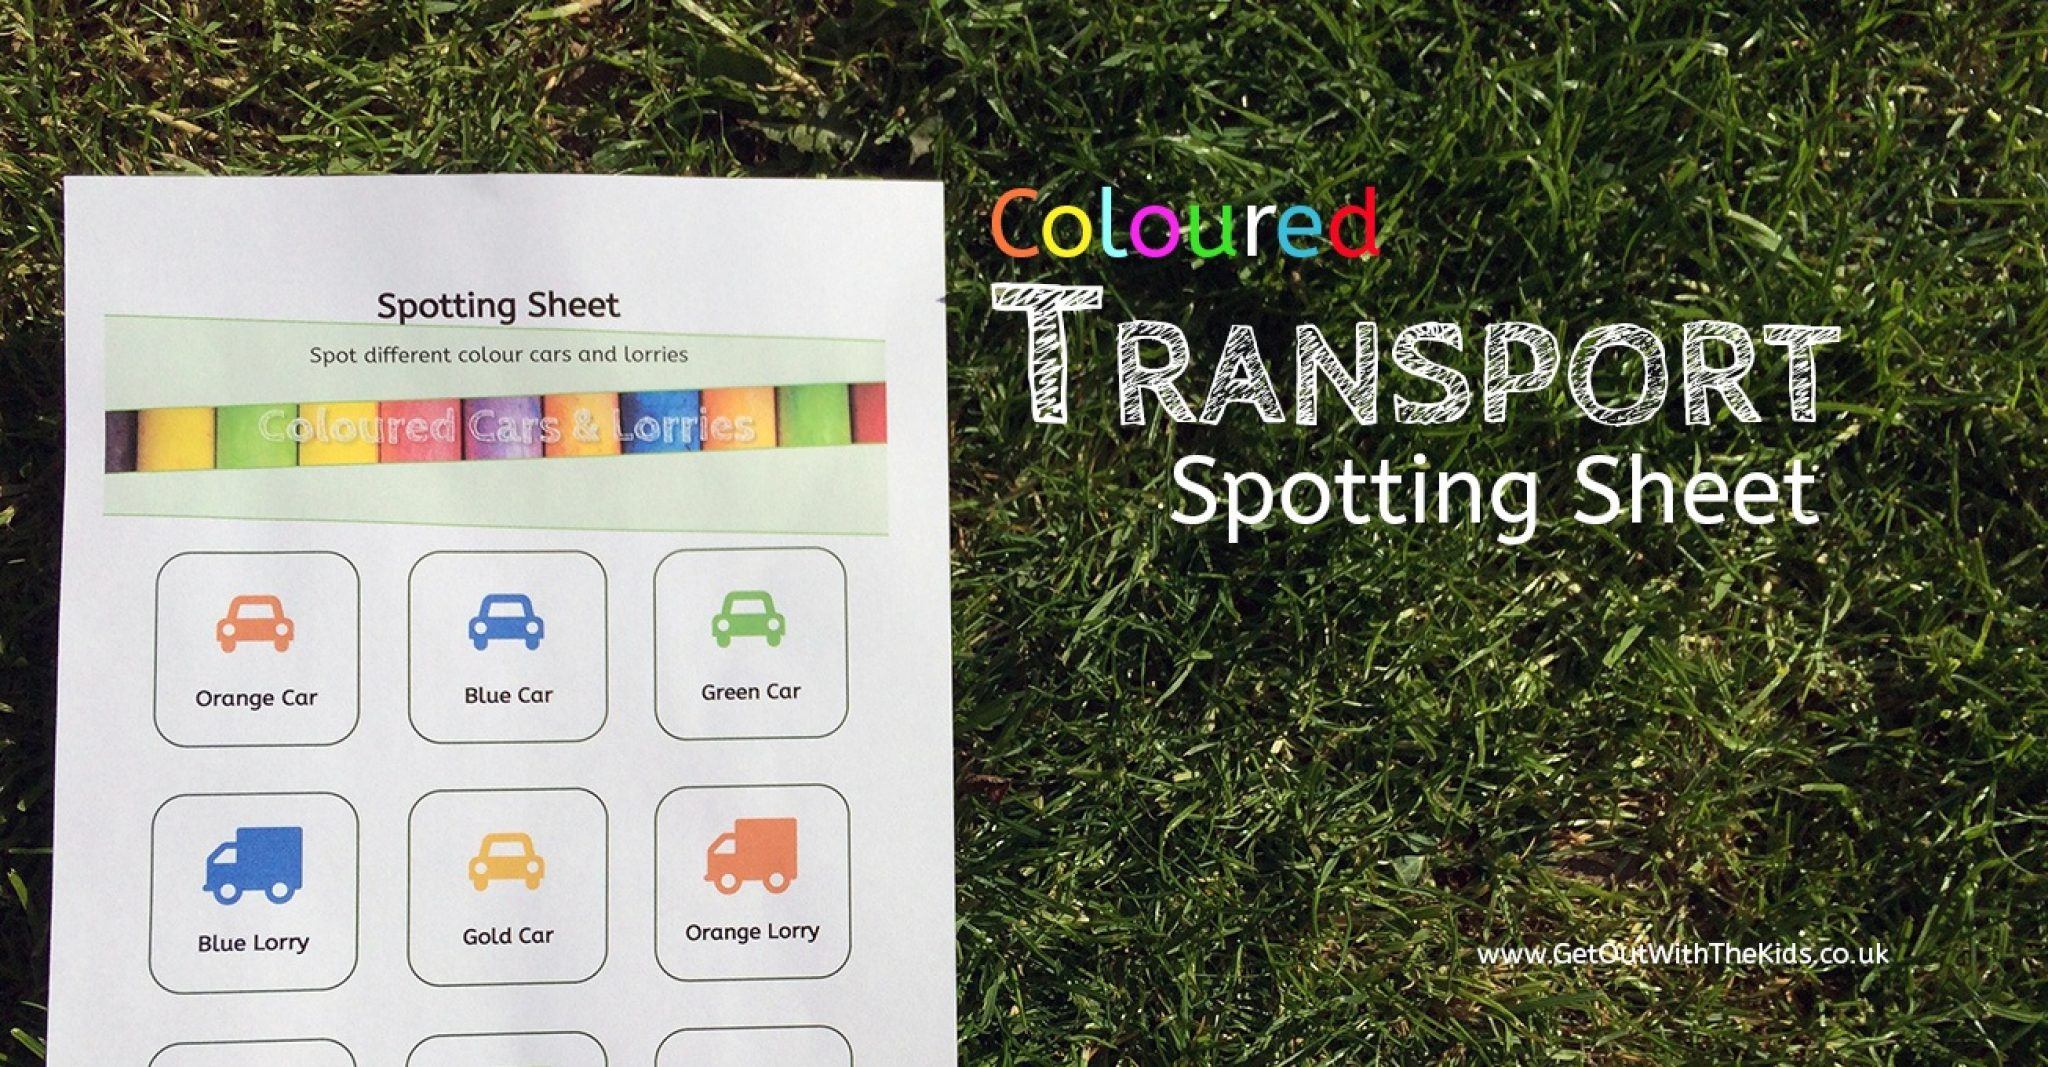 Download and print it out.

All your child has to do is cross off an item when they spot it.